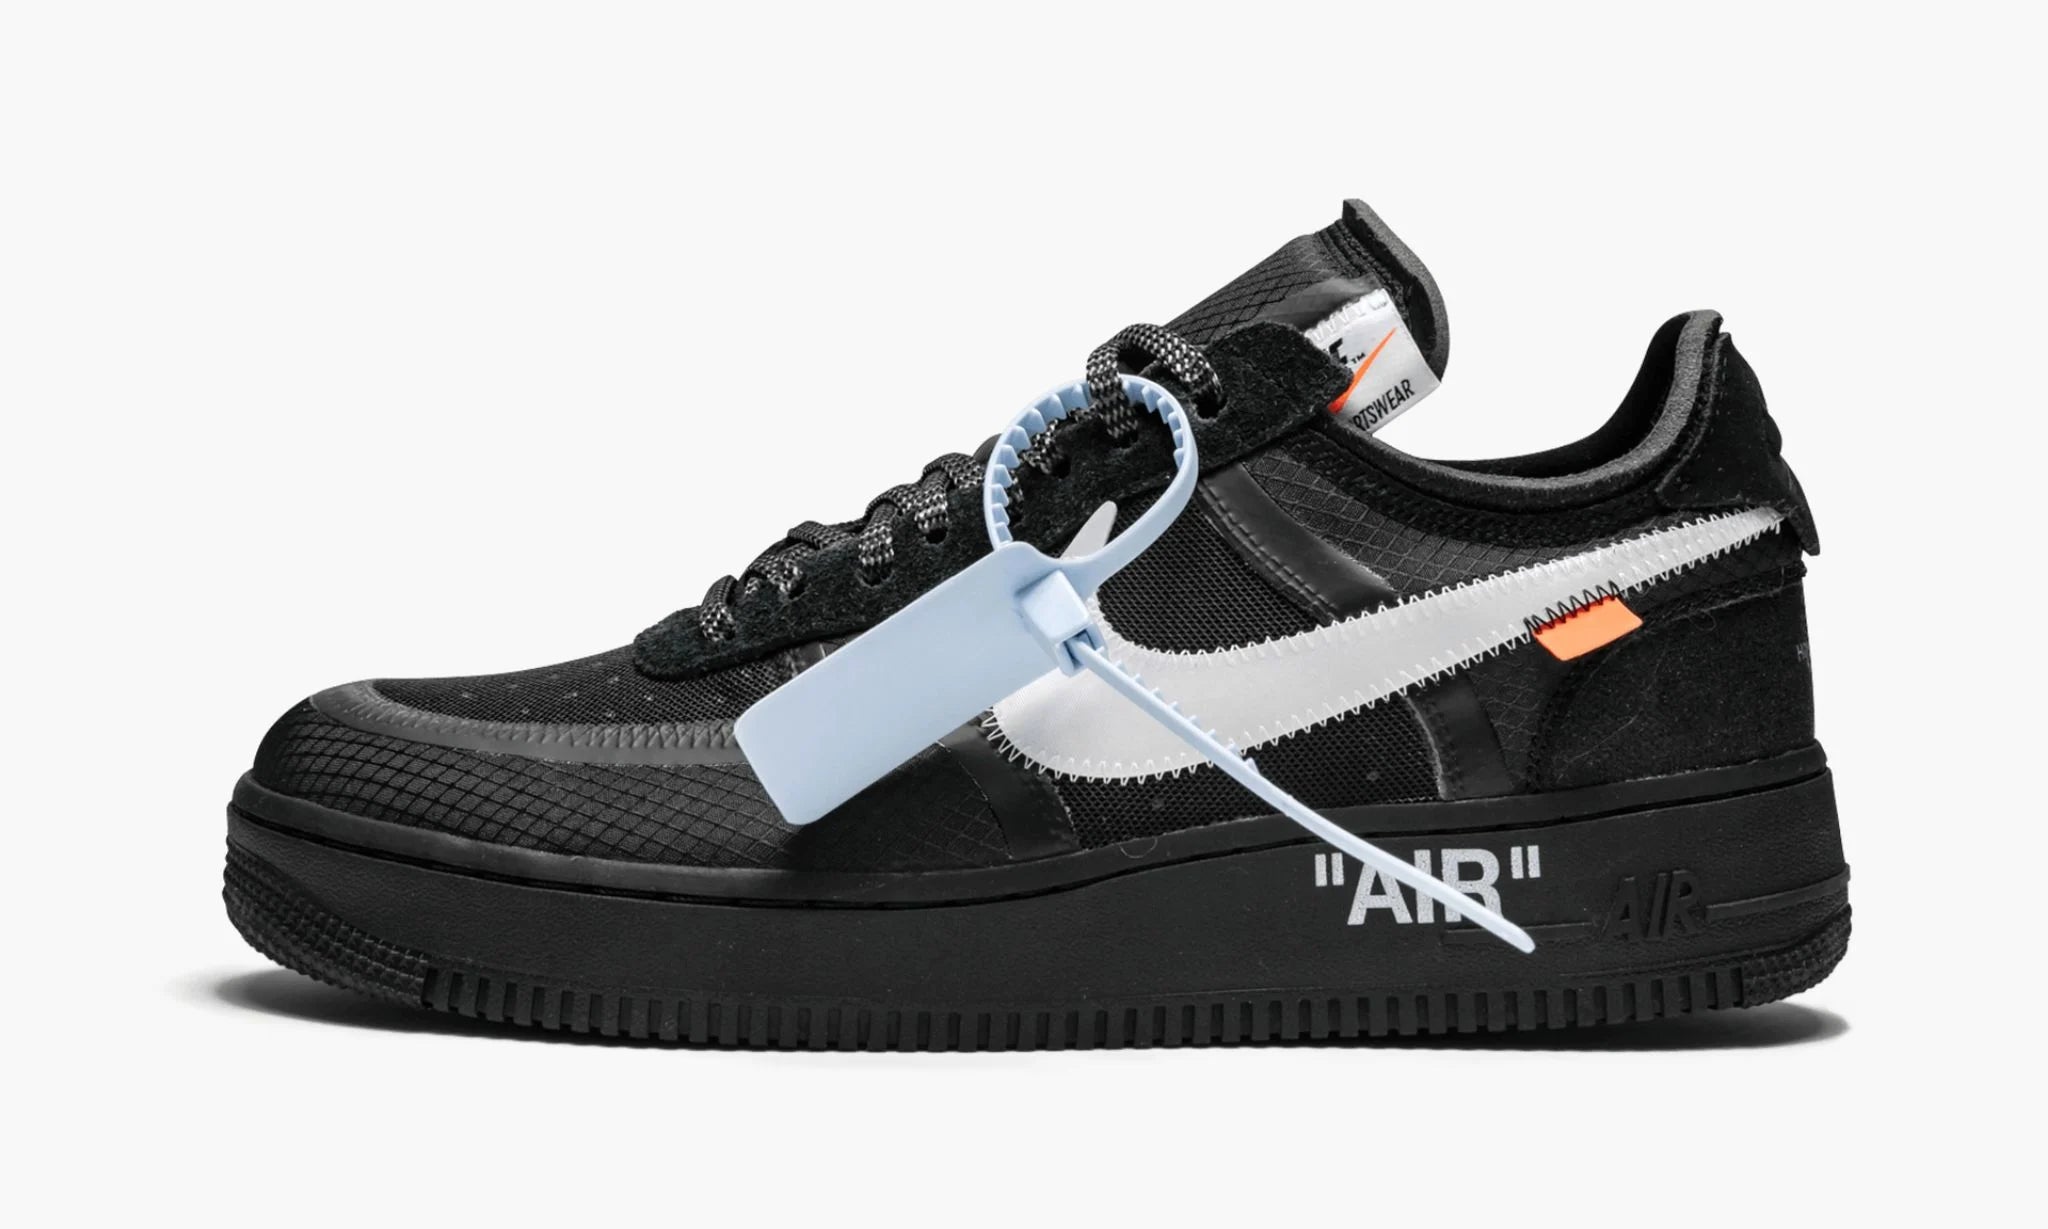 THE 10: NIKE AIR FORCE 1 LOW "Off-White Black"